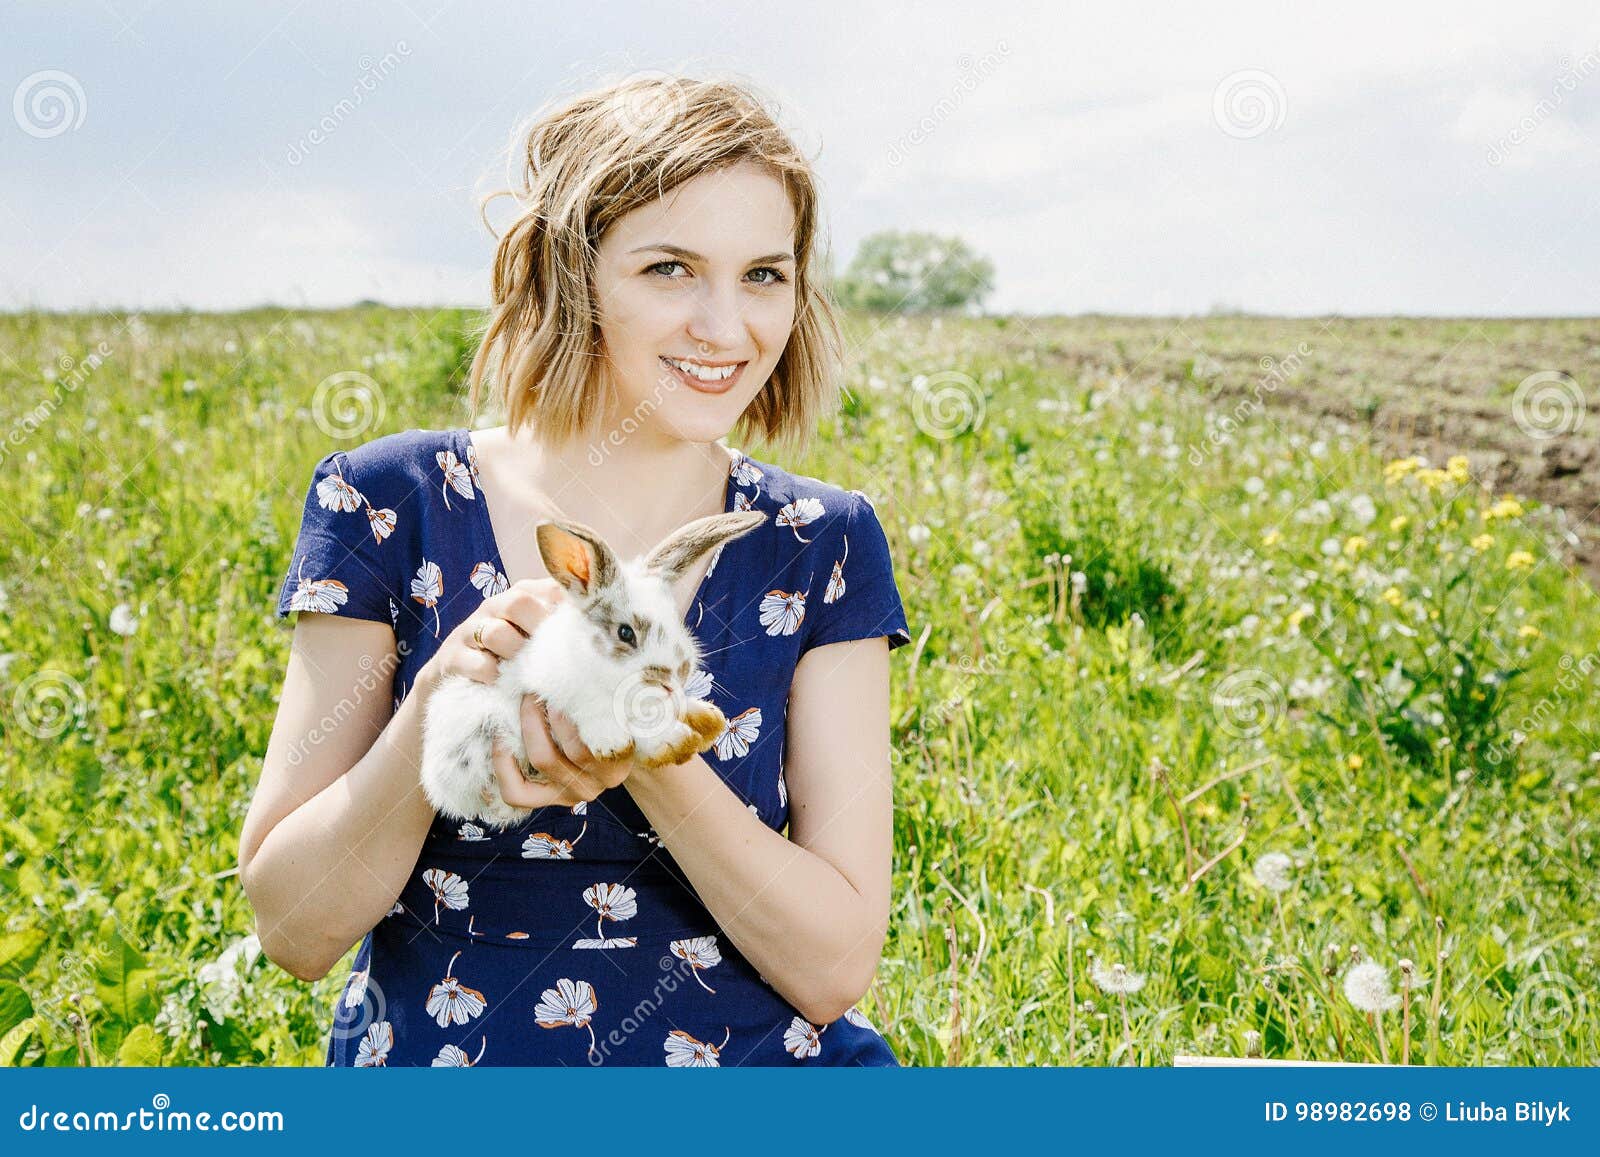 young girl with a little rabbit.